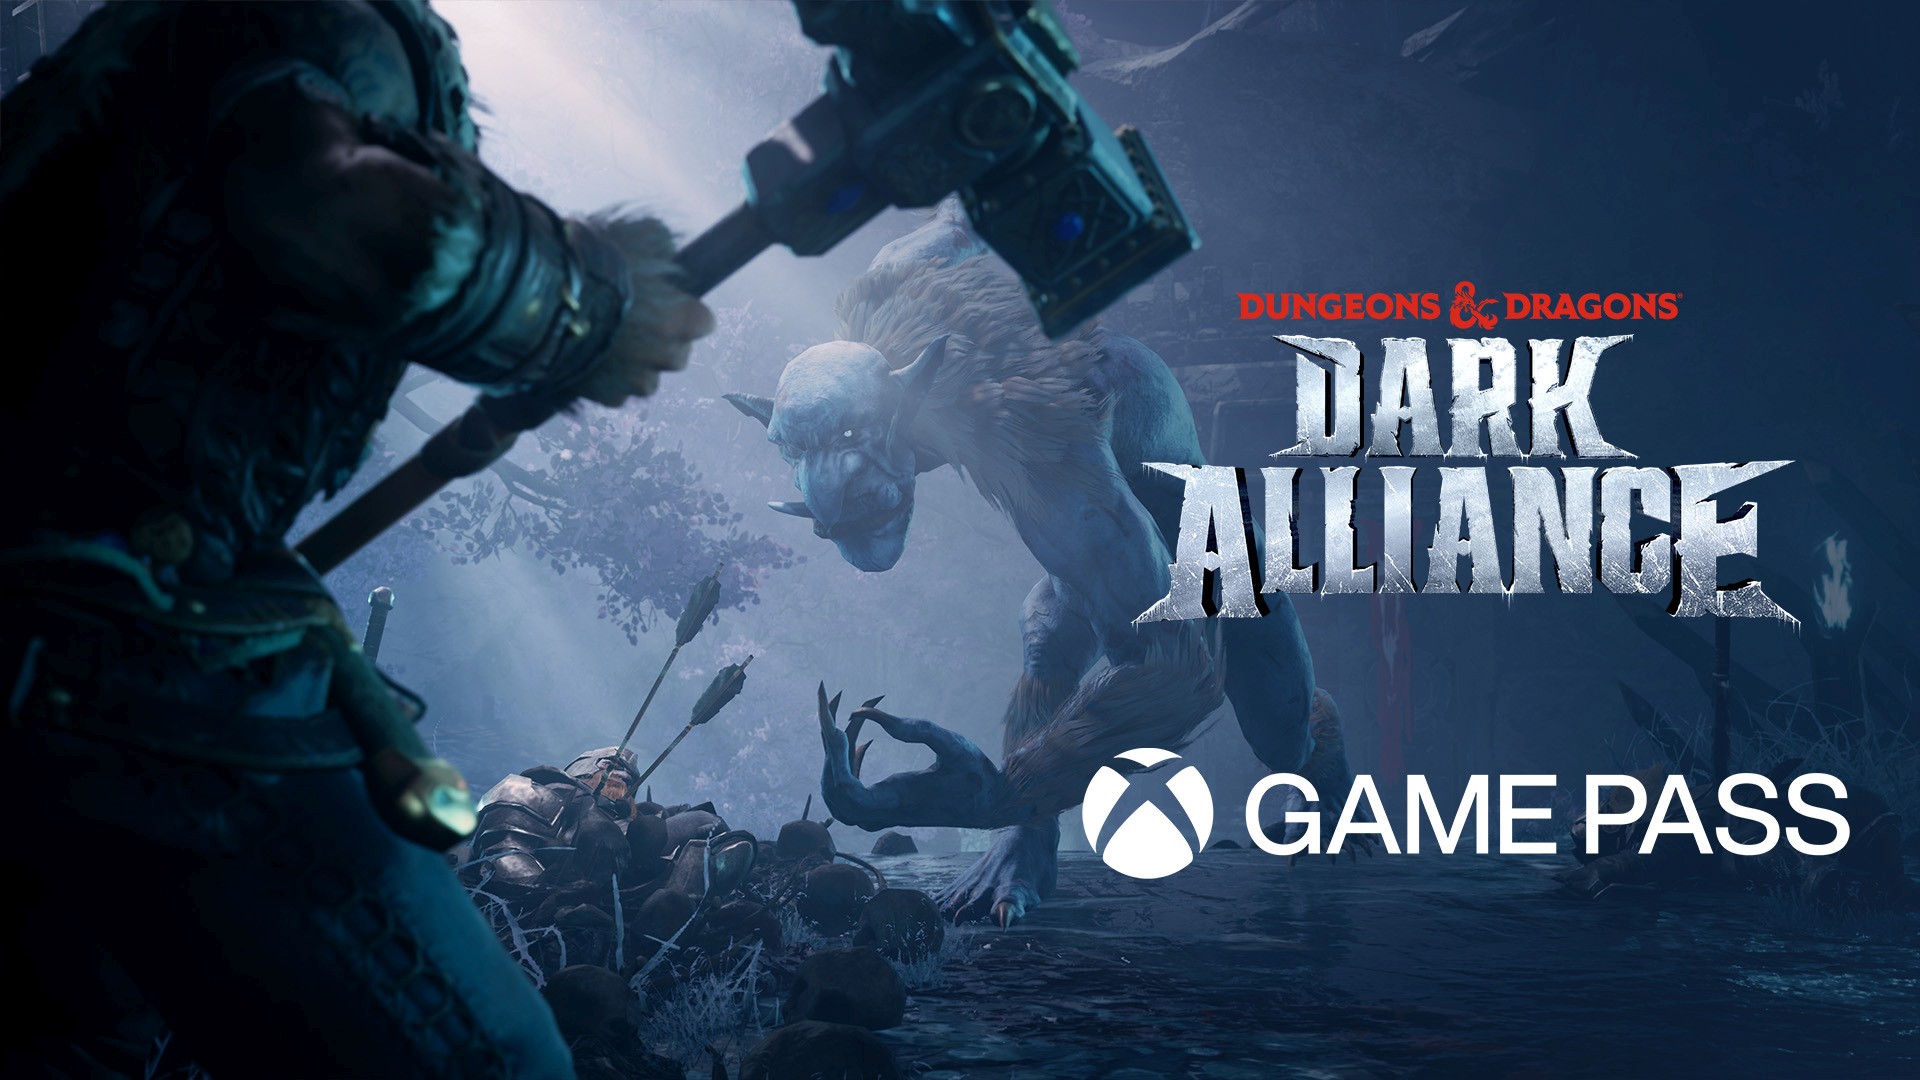 Opera dak eiwit Dungeons & Dragons Dark Alliance is Coming to Xbox Game Pass on Day One -  Xbox Wire